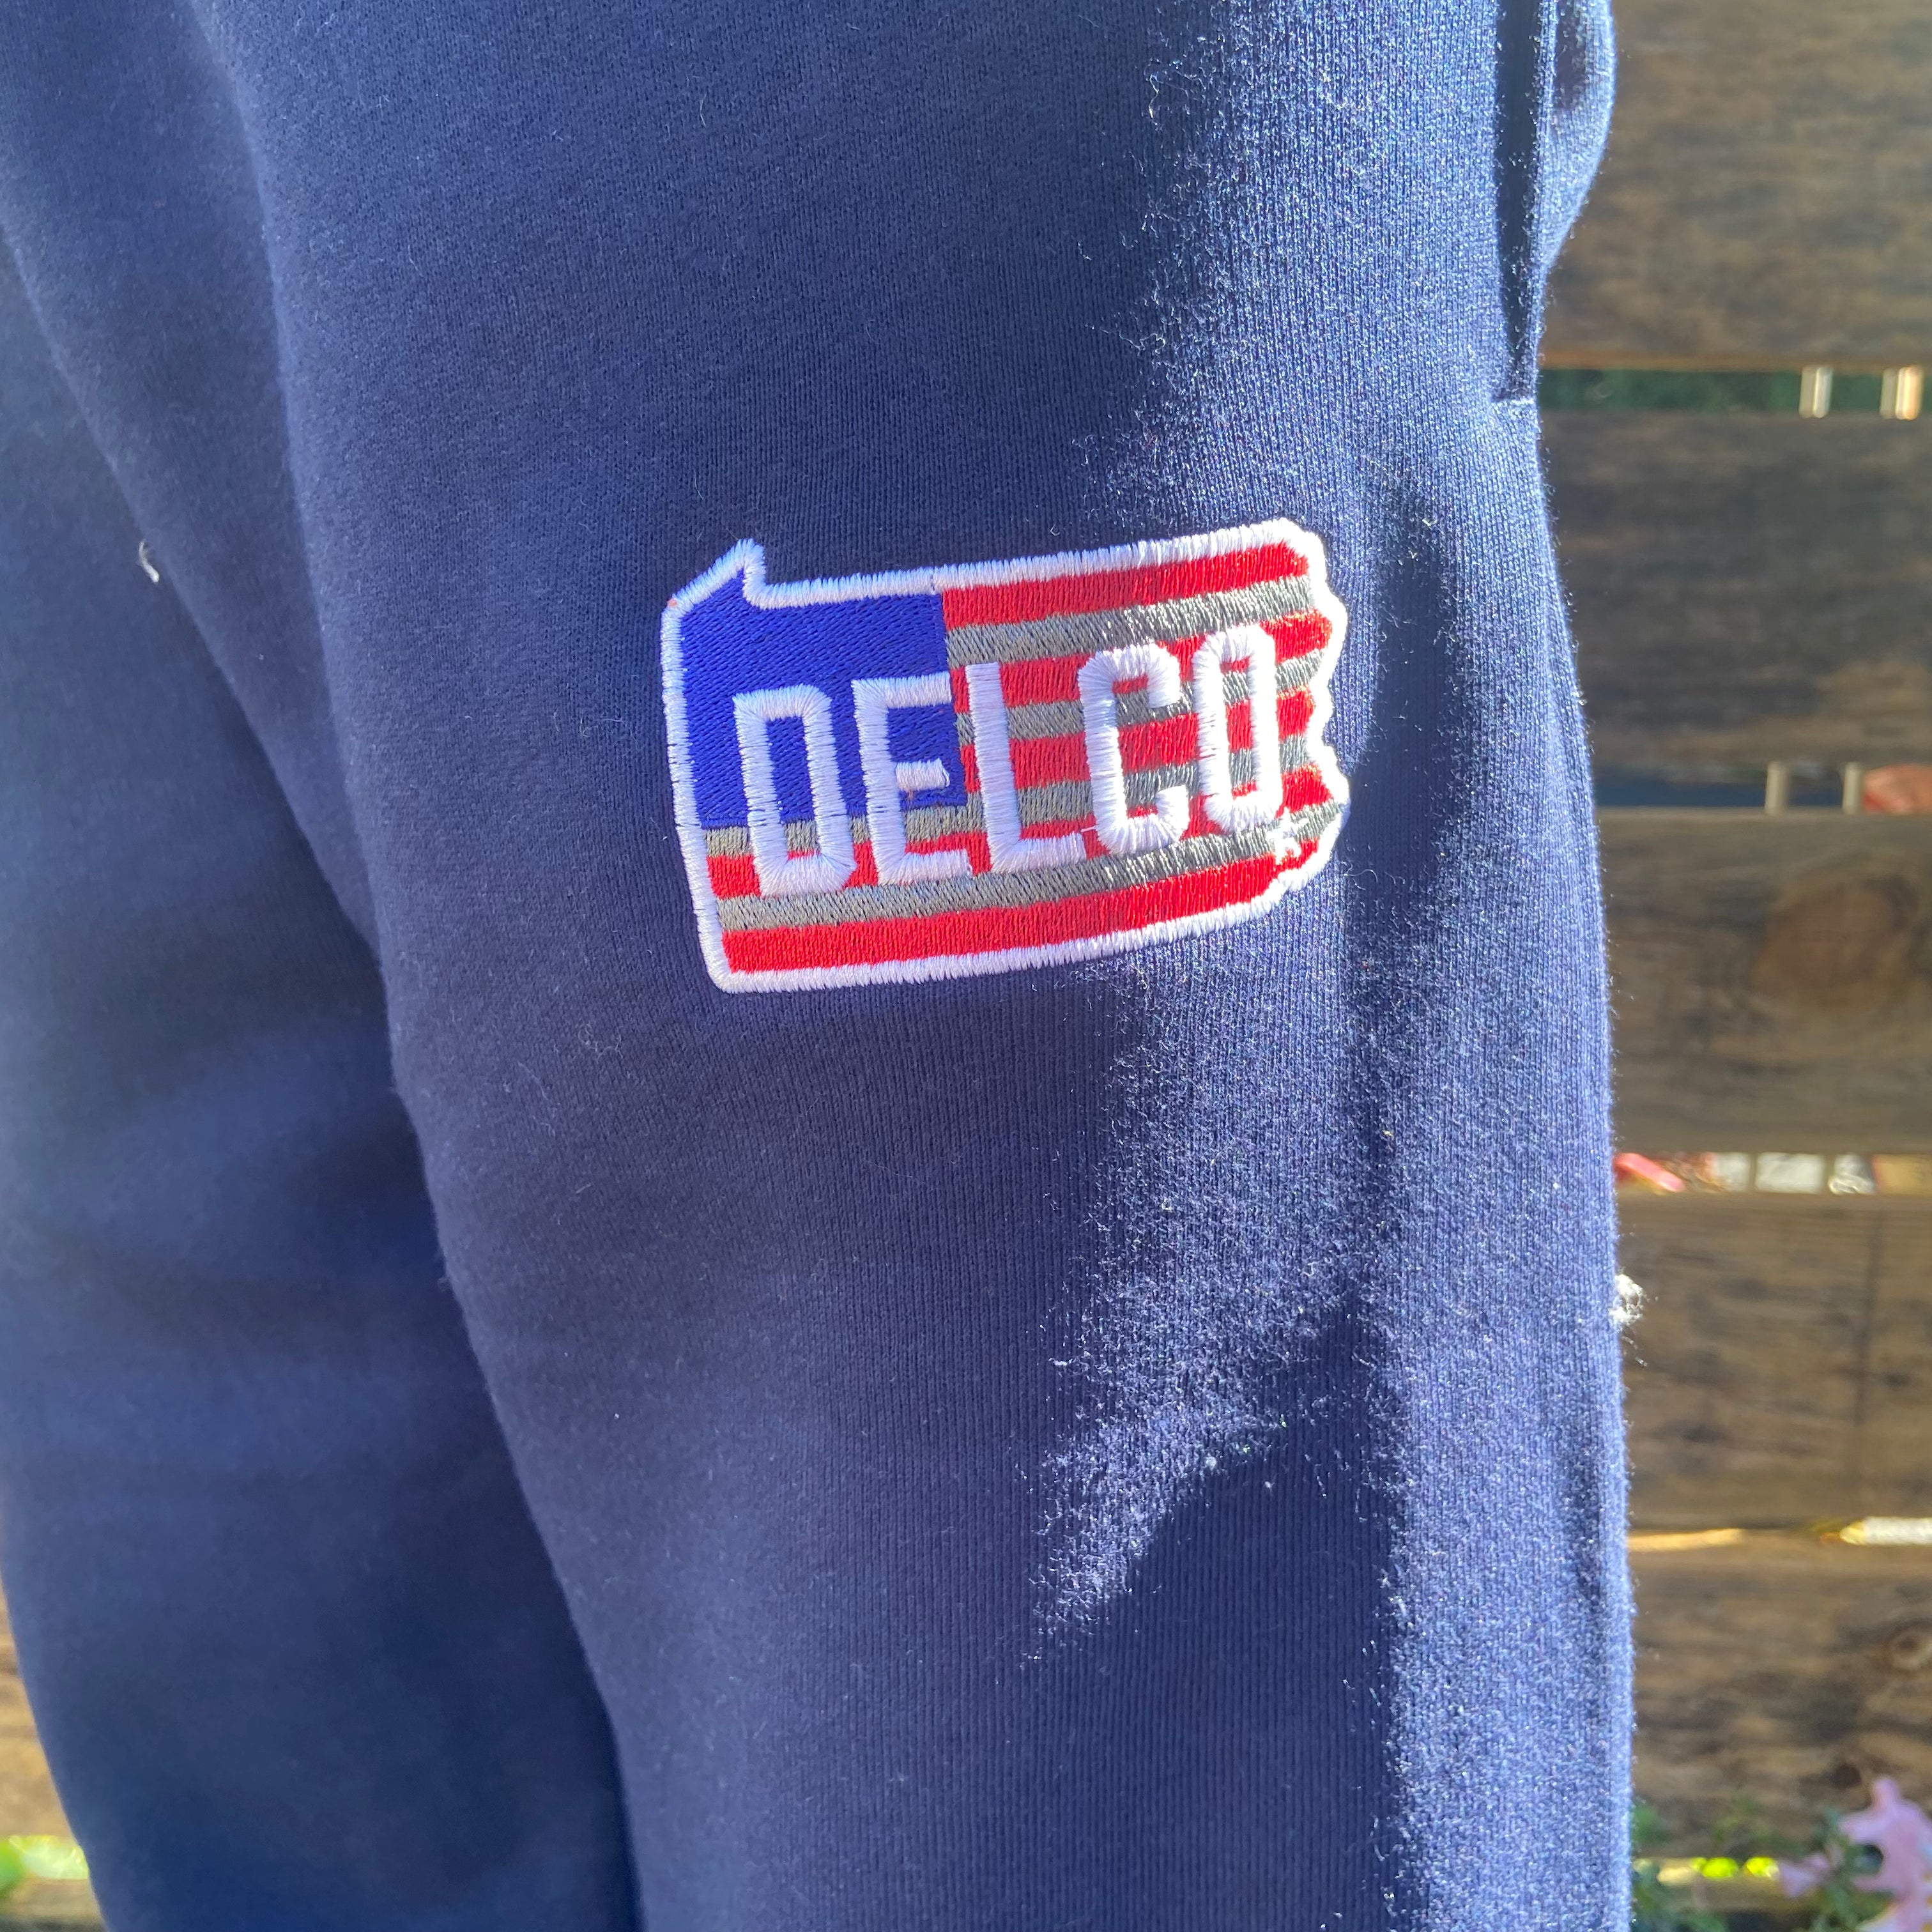 DELCO 33 Sweatpants – Blue Rooted